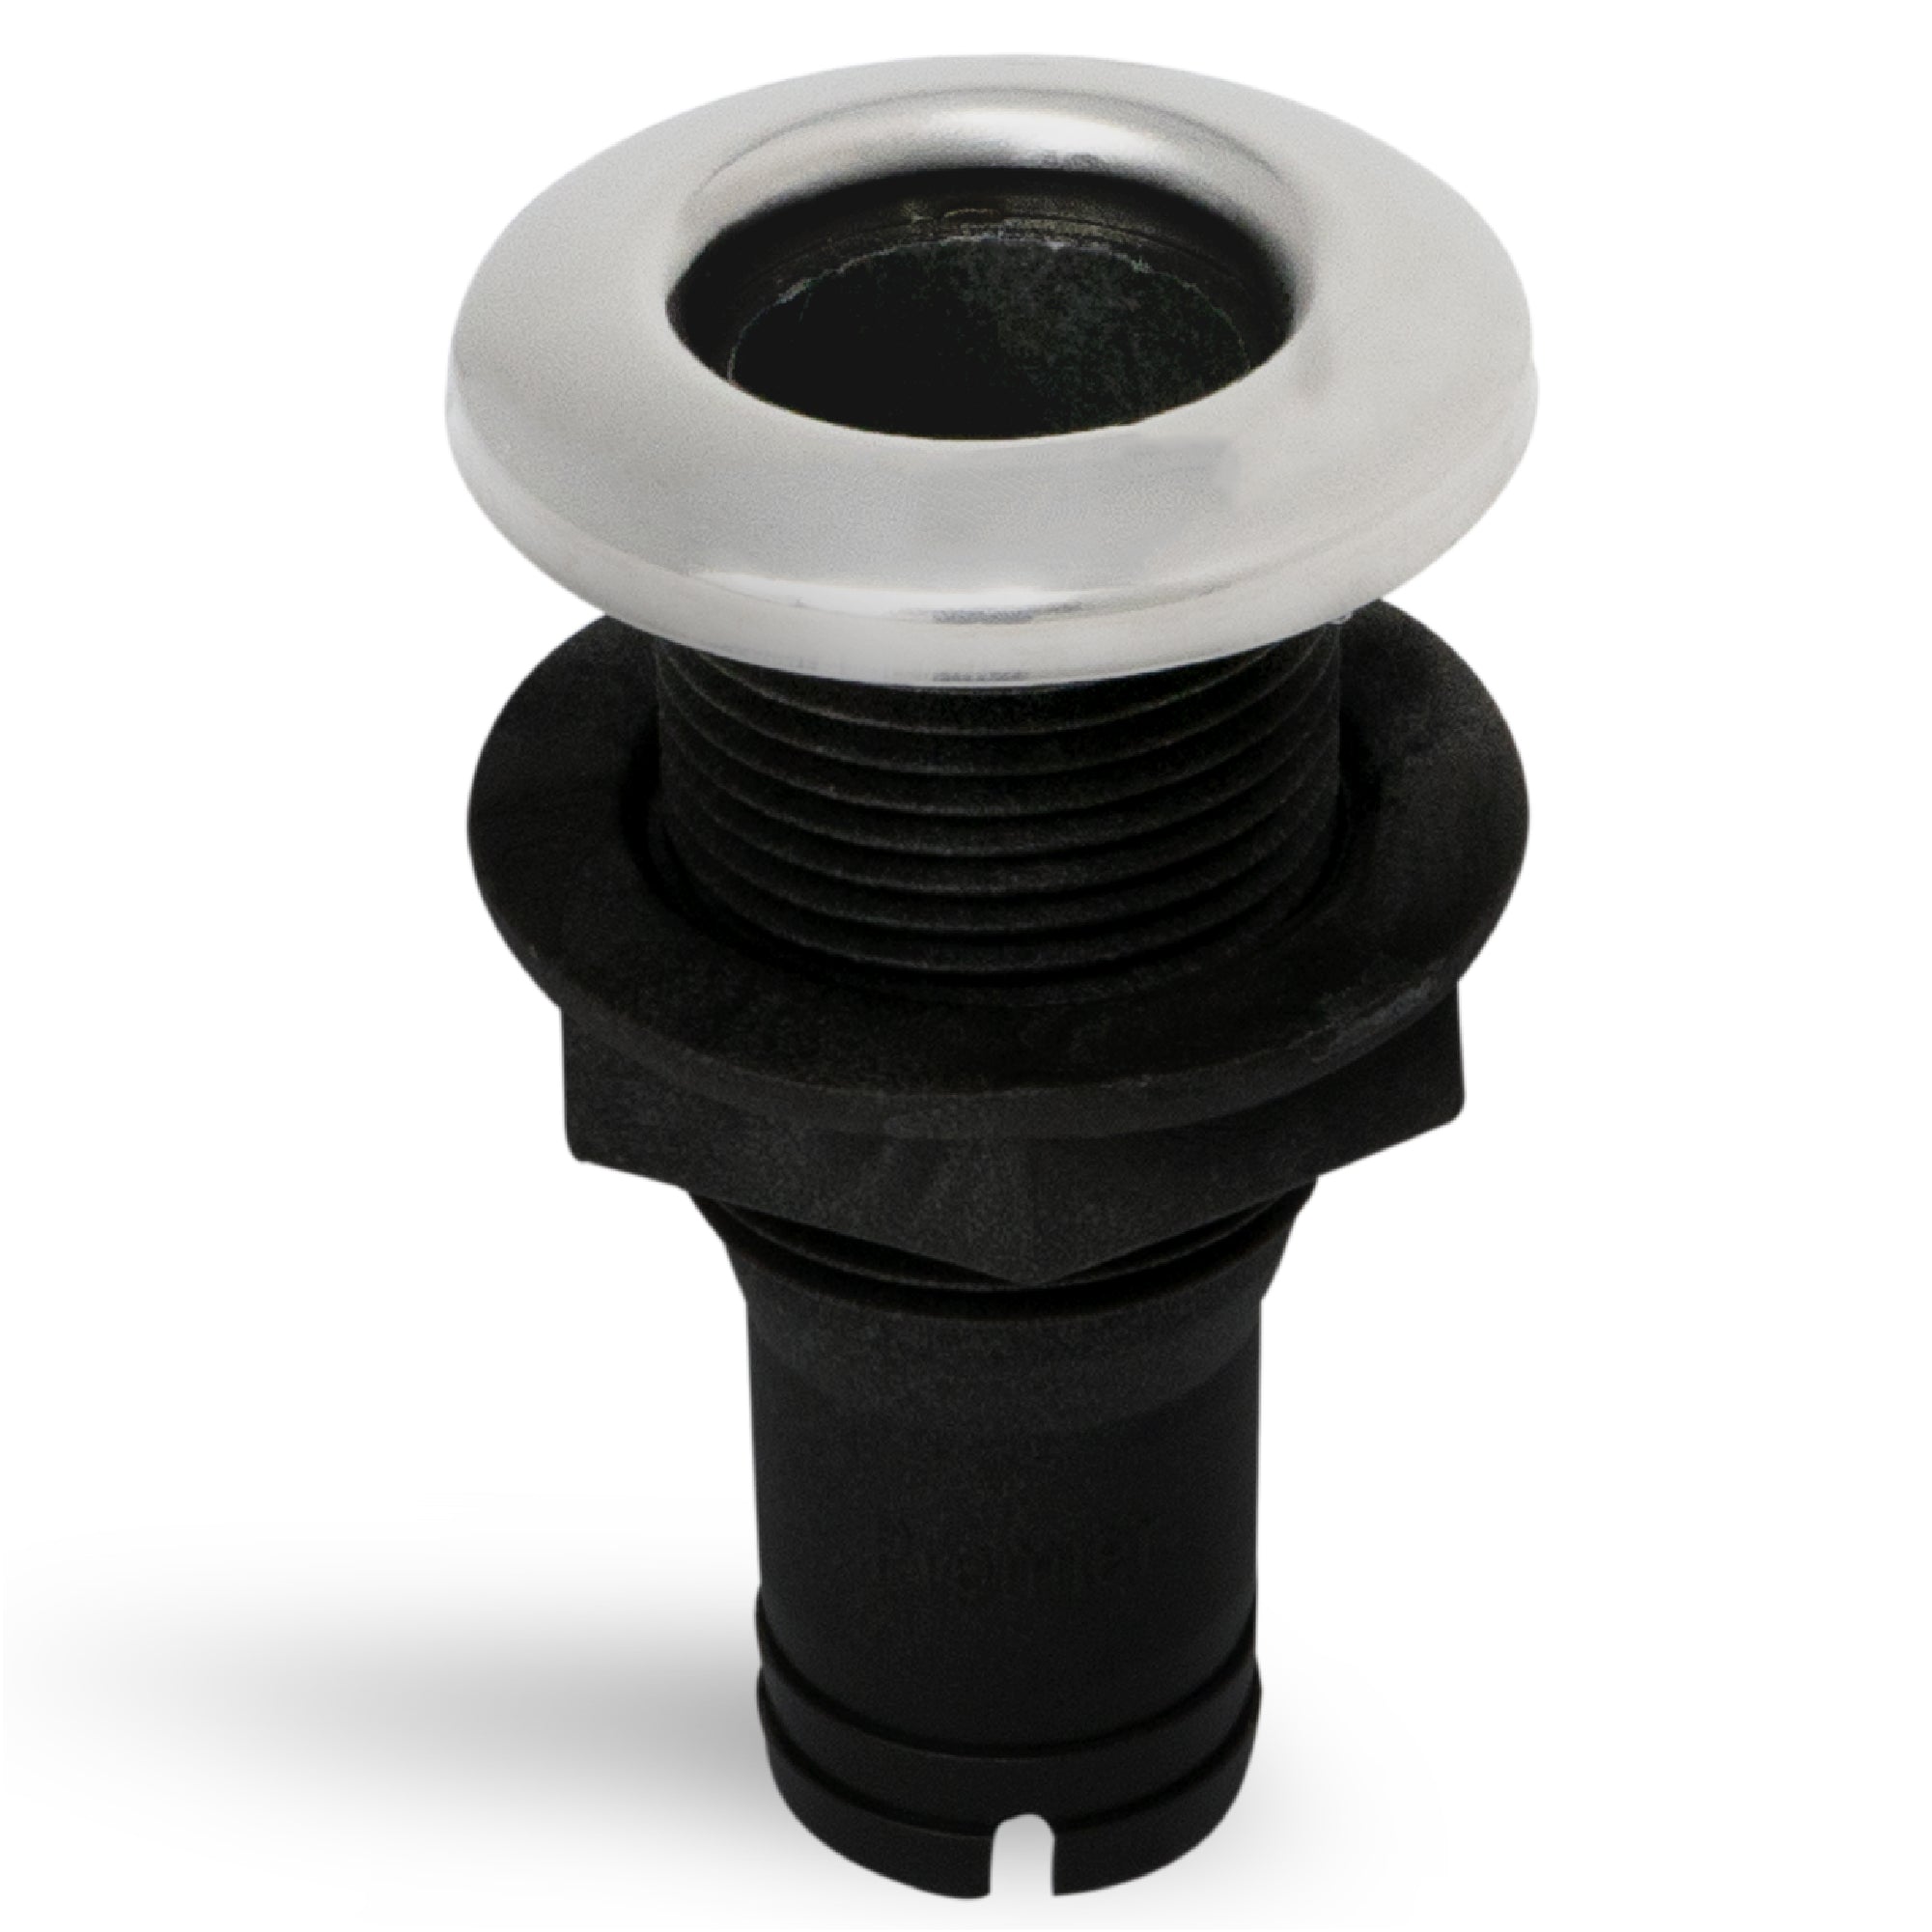 Thru-Hull Fitting Connection for Hose, 1-1/2" Black - FO2997